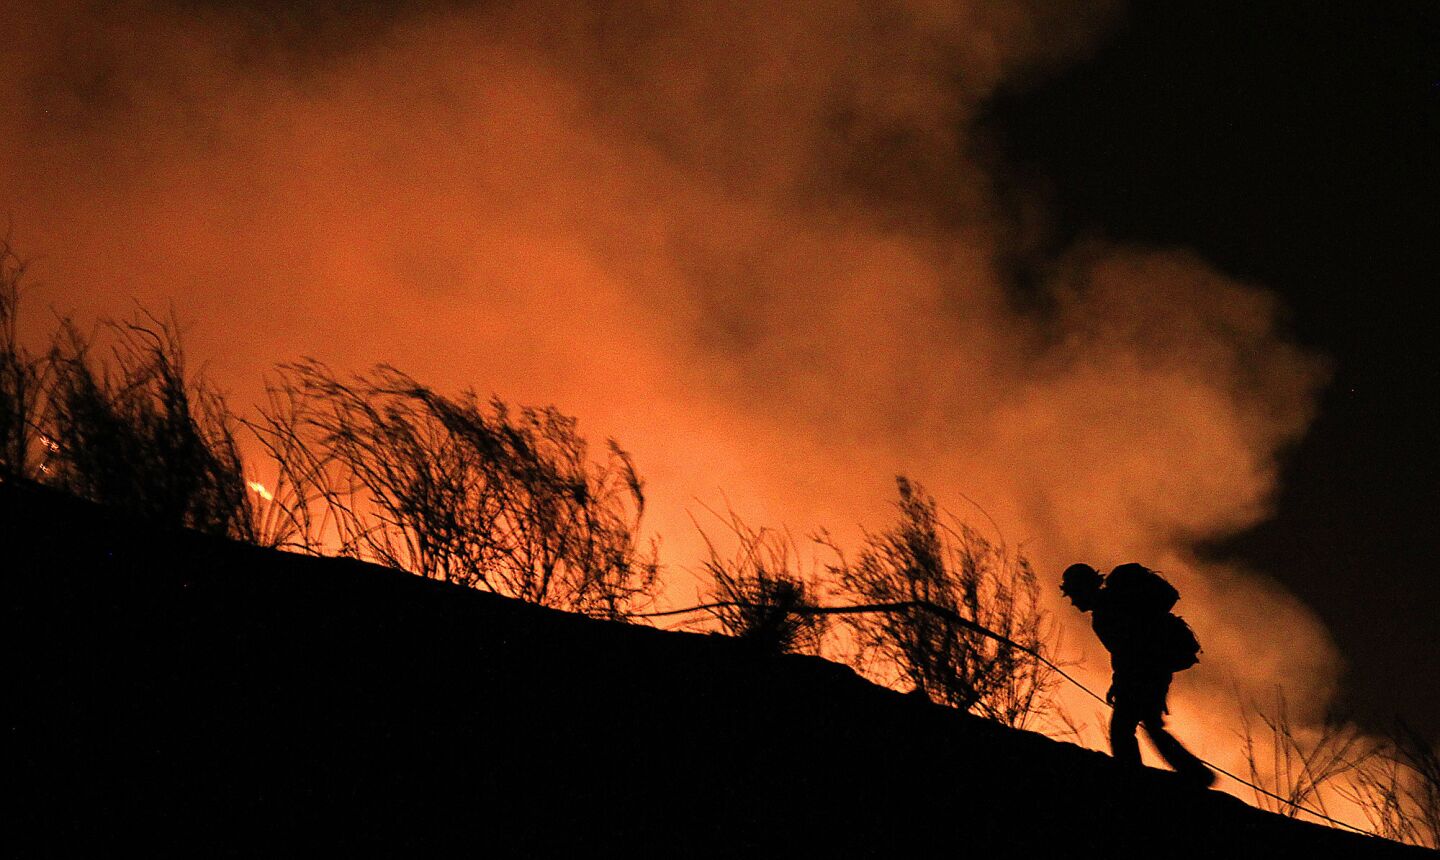 The Powerhouse fire burns in steep terrain along San Francisquito Canyon Road in the Angeles National Forest.